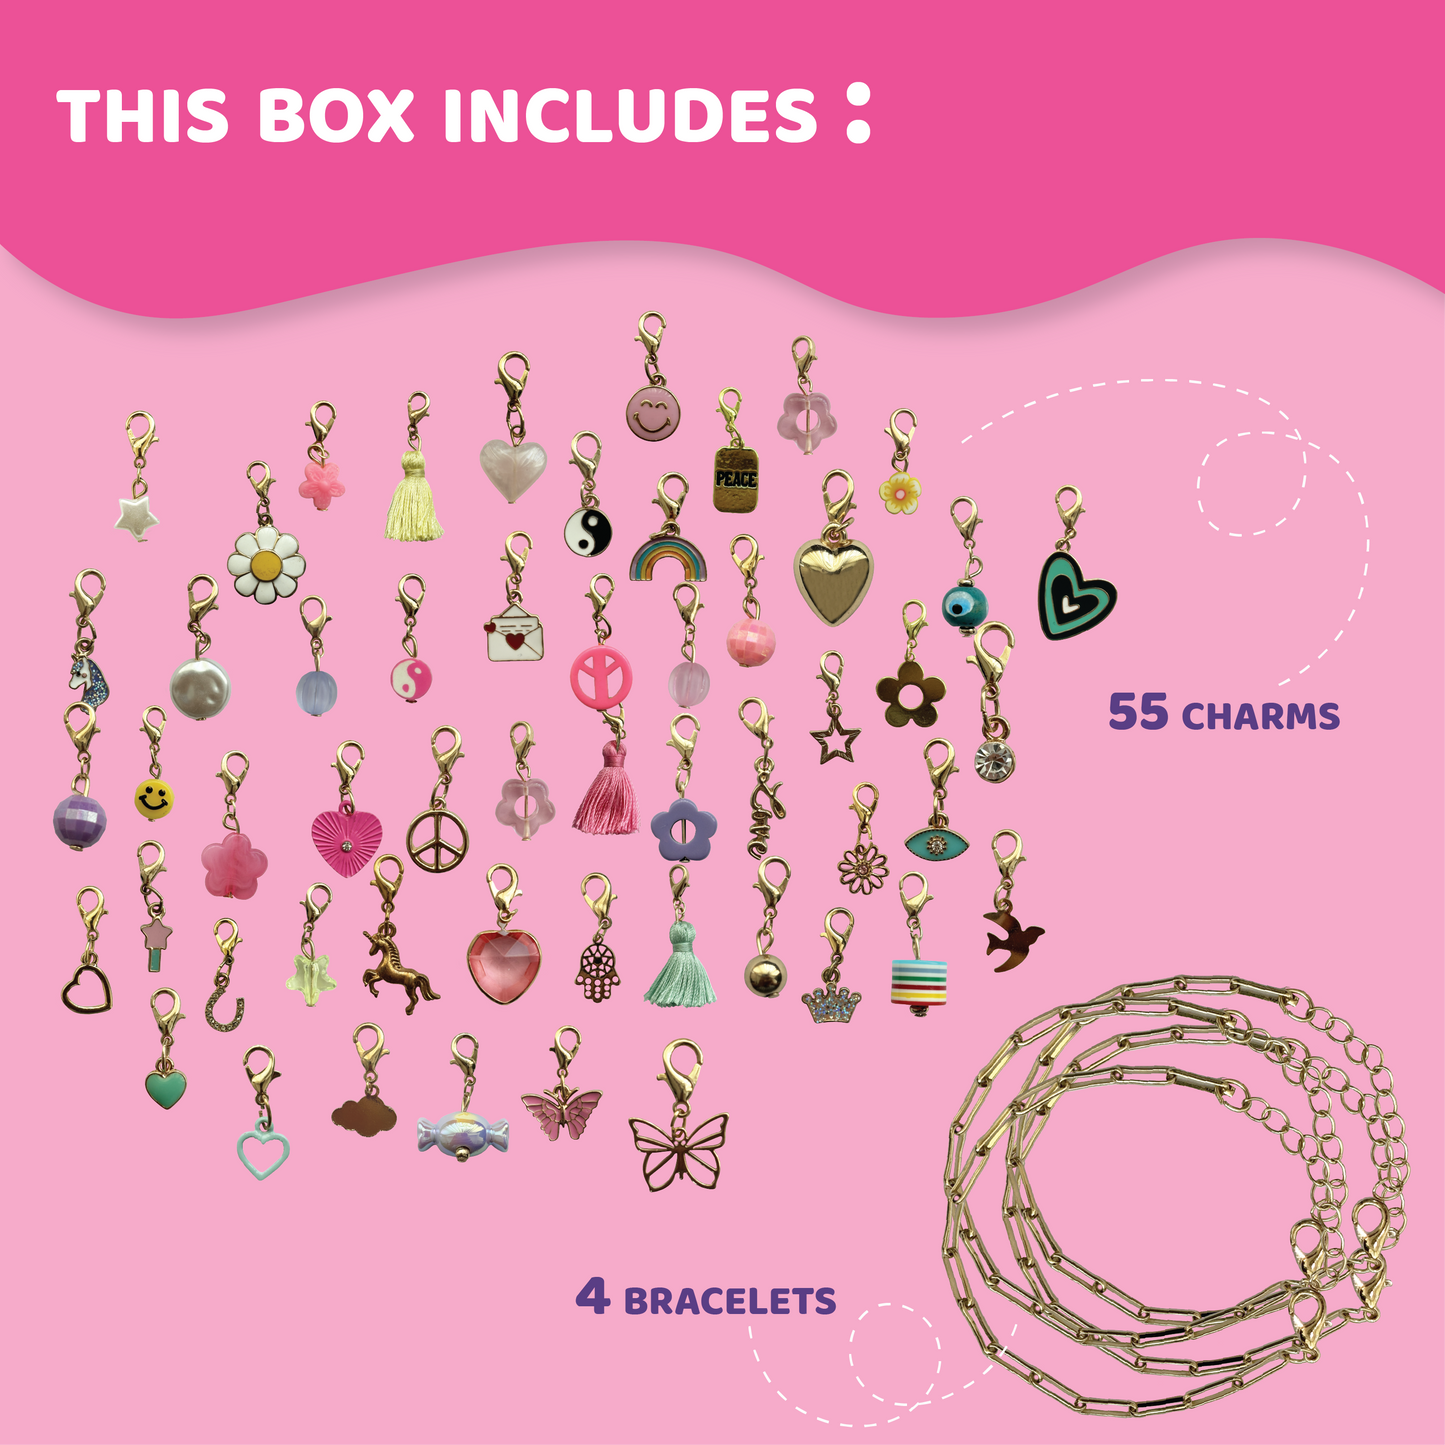 jackinthebox Girls Charm Bracelet Making kit | Includes 4 Bracelets & 55 Charms |Kids Jewelry Making kit for Girls 8-12 | Gifts for 8 9 10 11 12 Year Old Girls | Girl Toys 8-10 Years Old